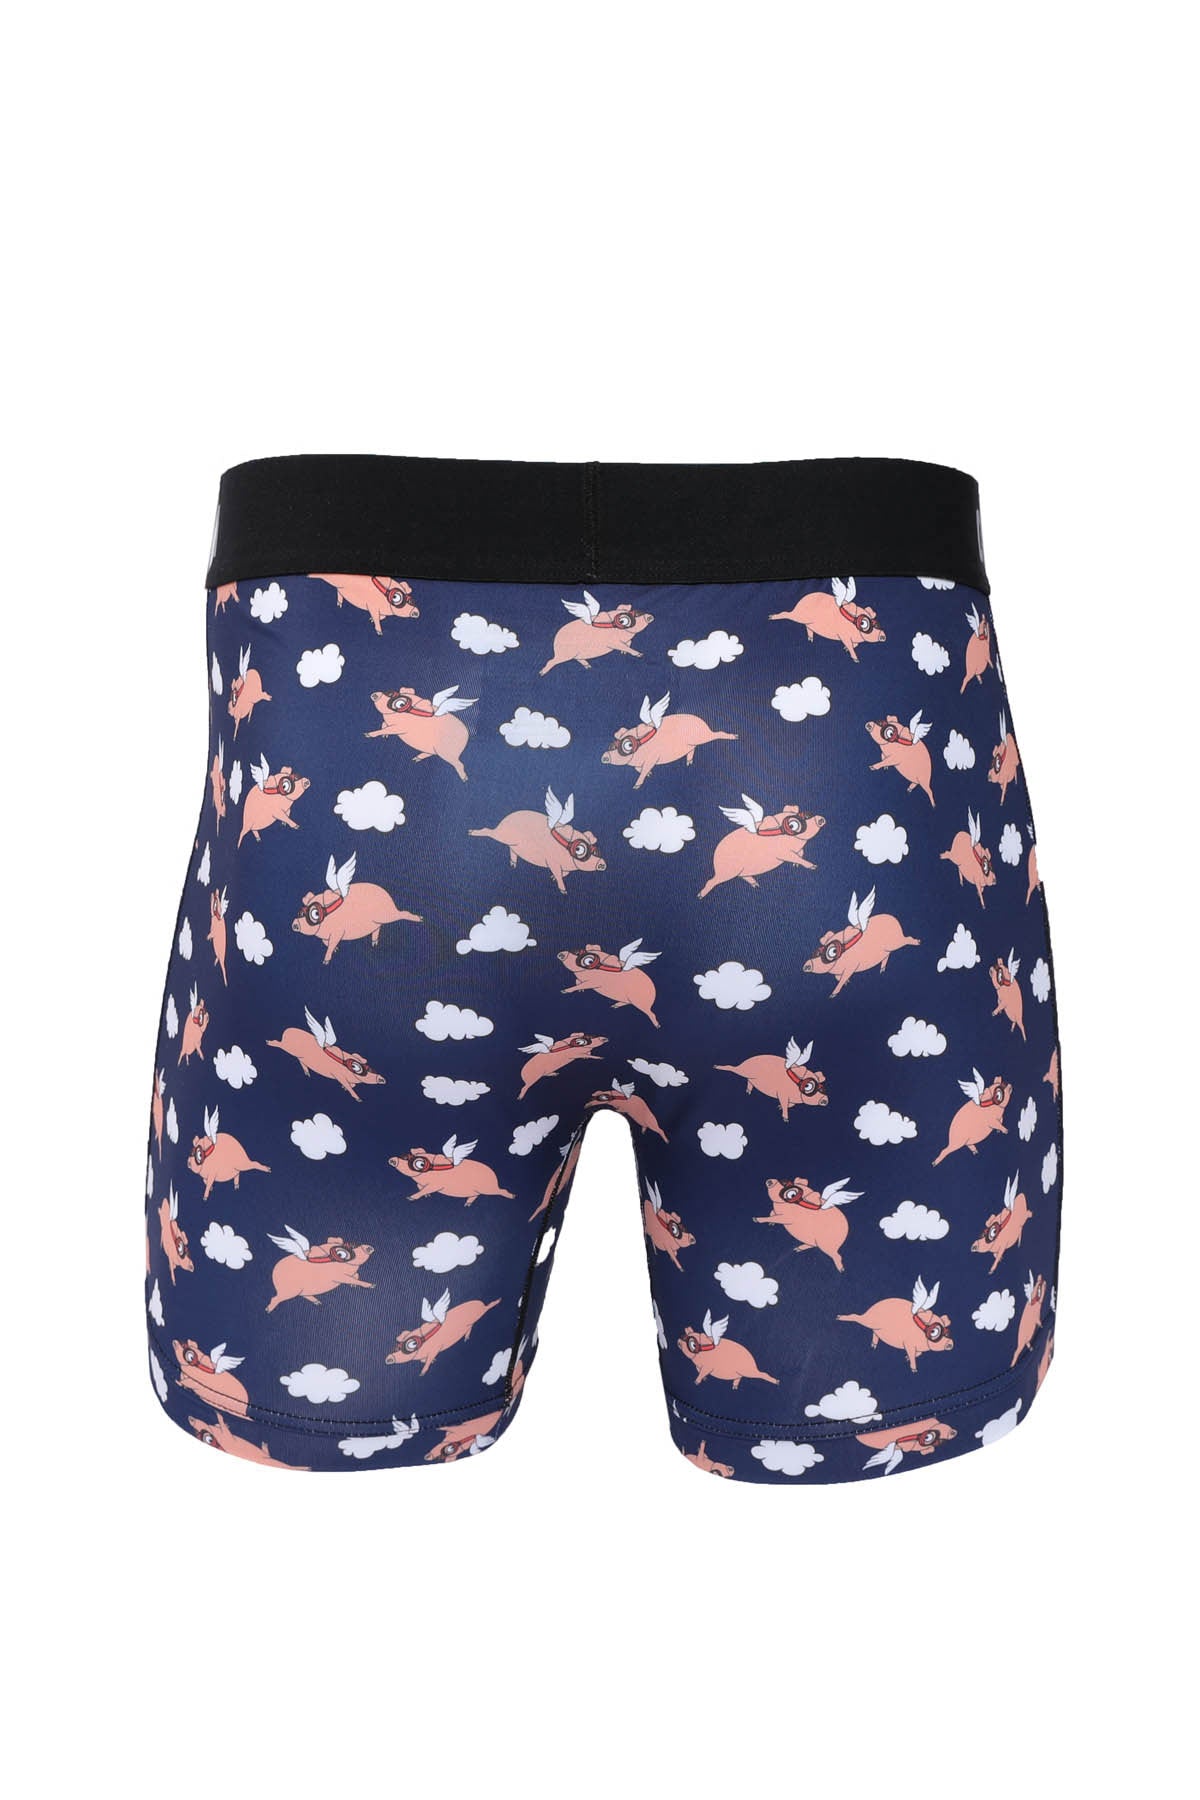 PIGS FLY BOXER BRIEF